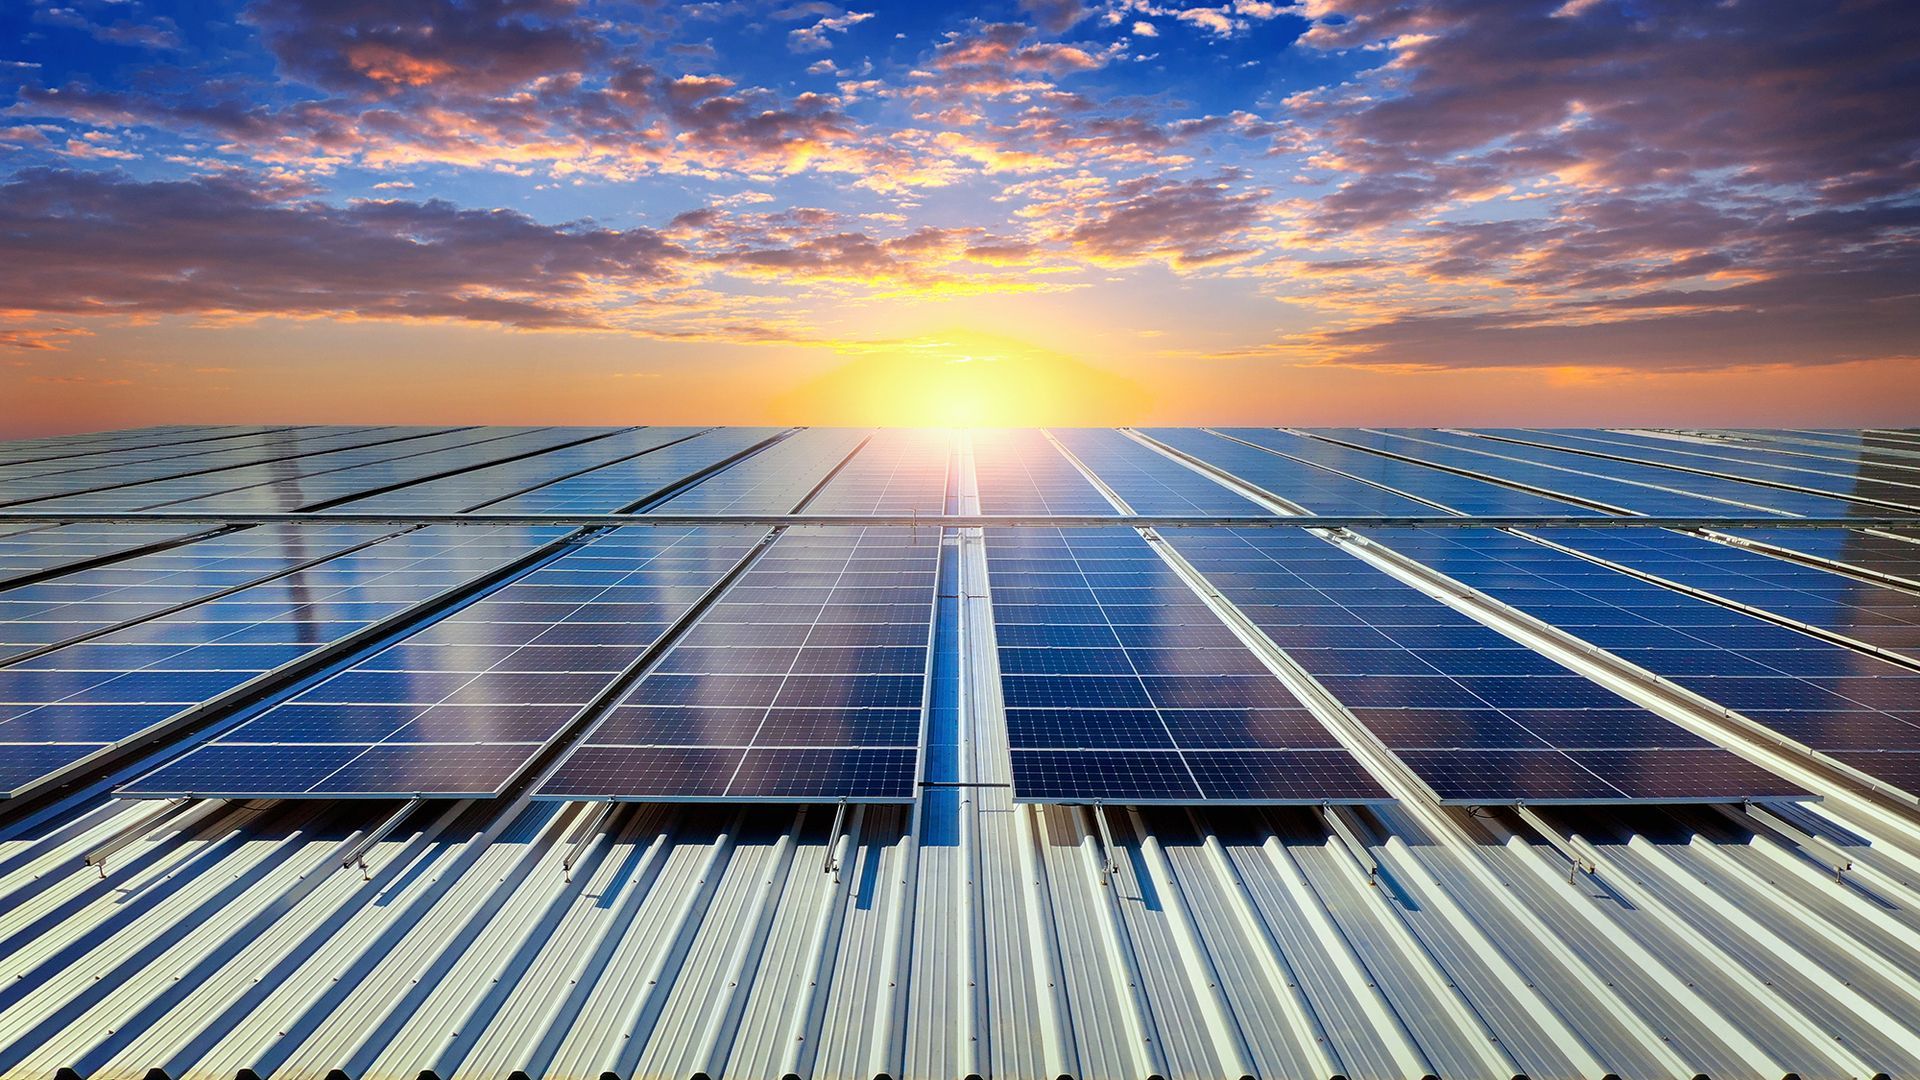 The adoption of renewable energy sources, such as solar and wind power, plays a pivotal role in making cold storage facilities more eco-friendly.